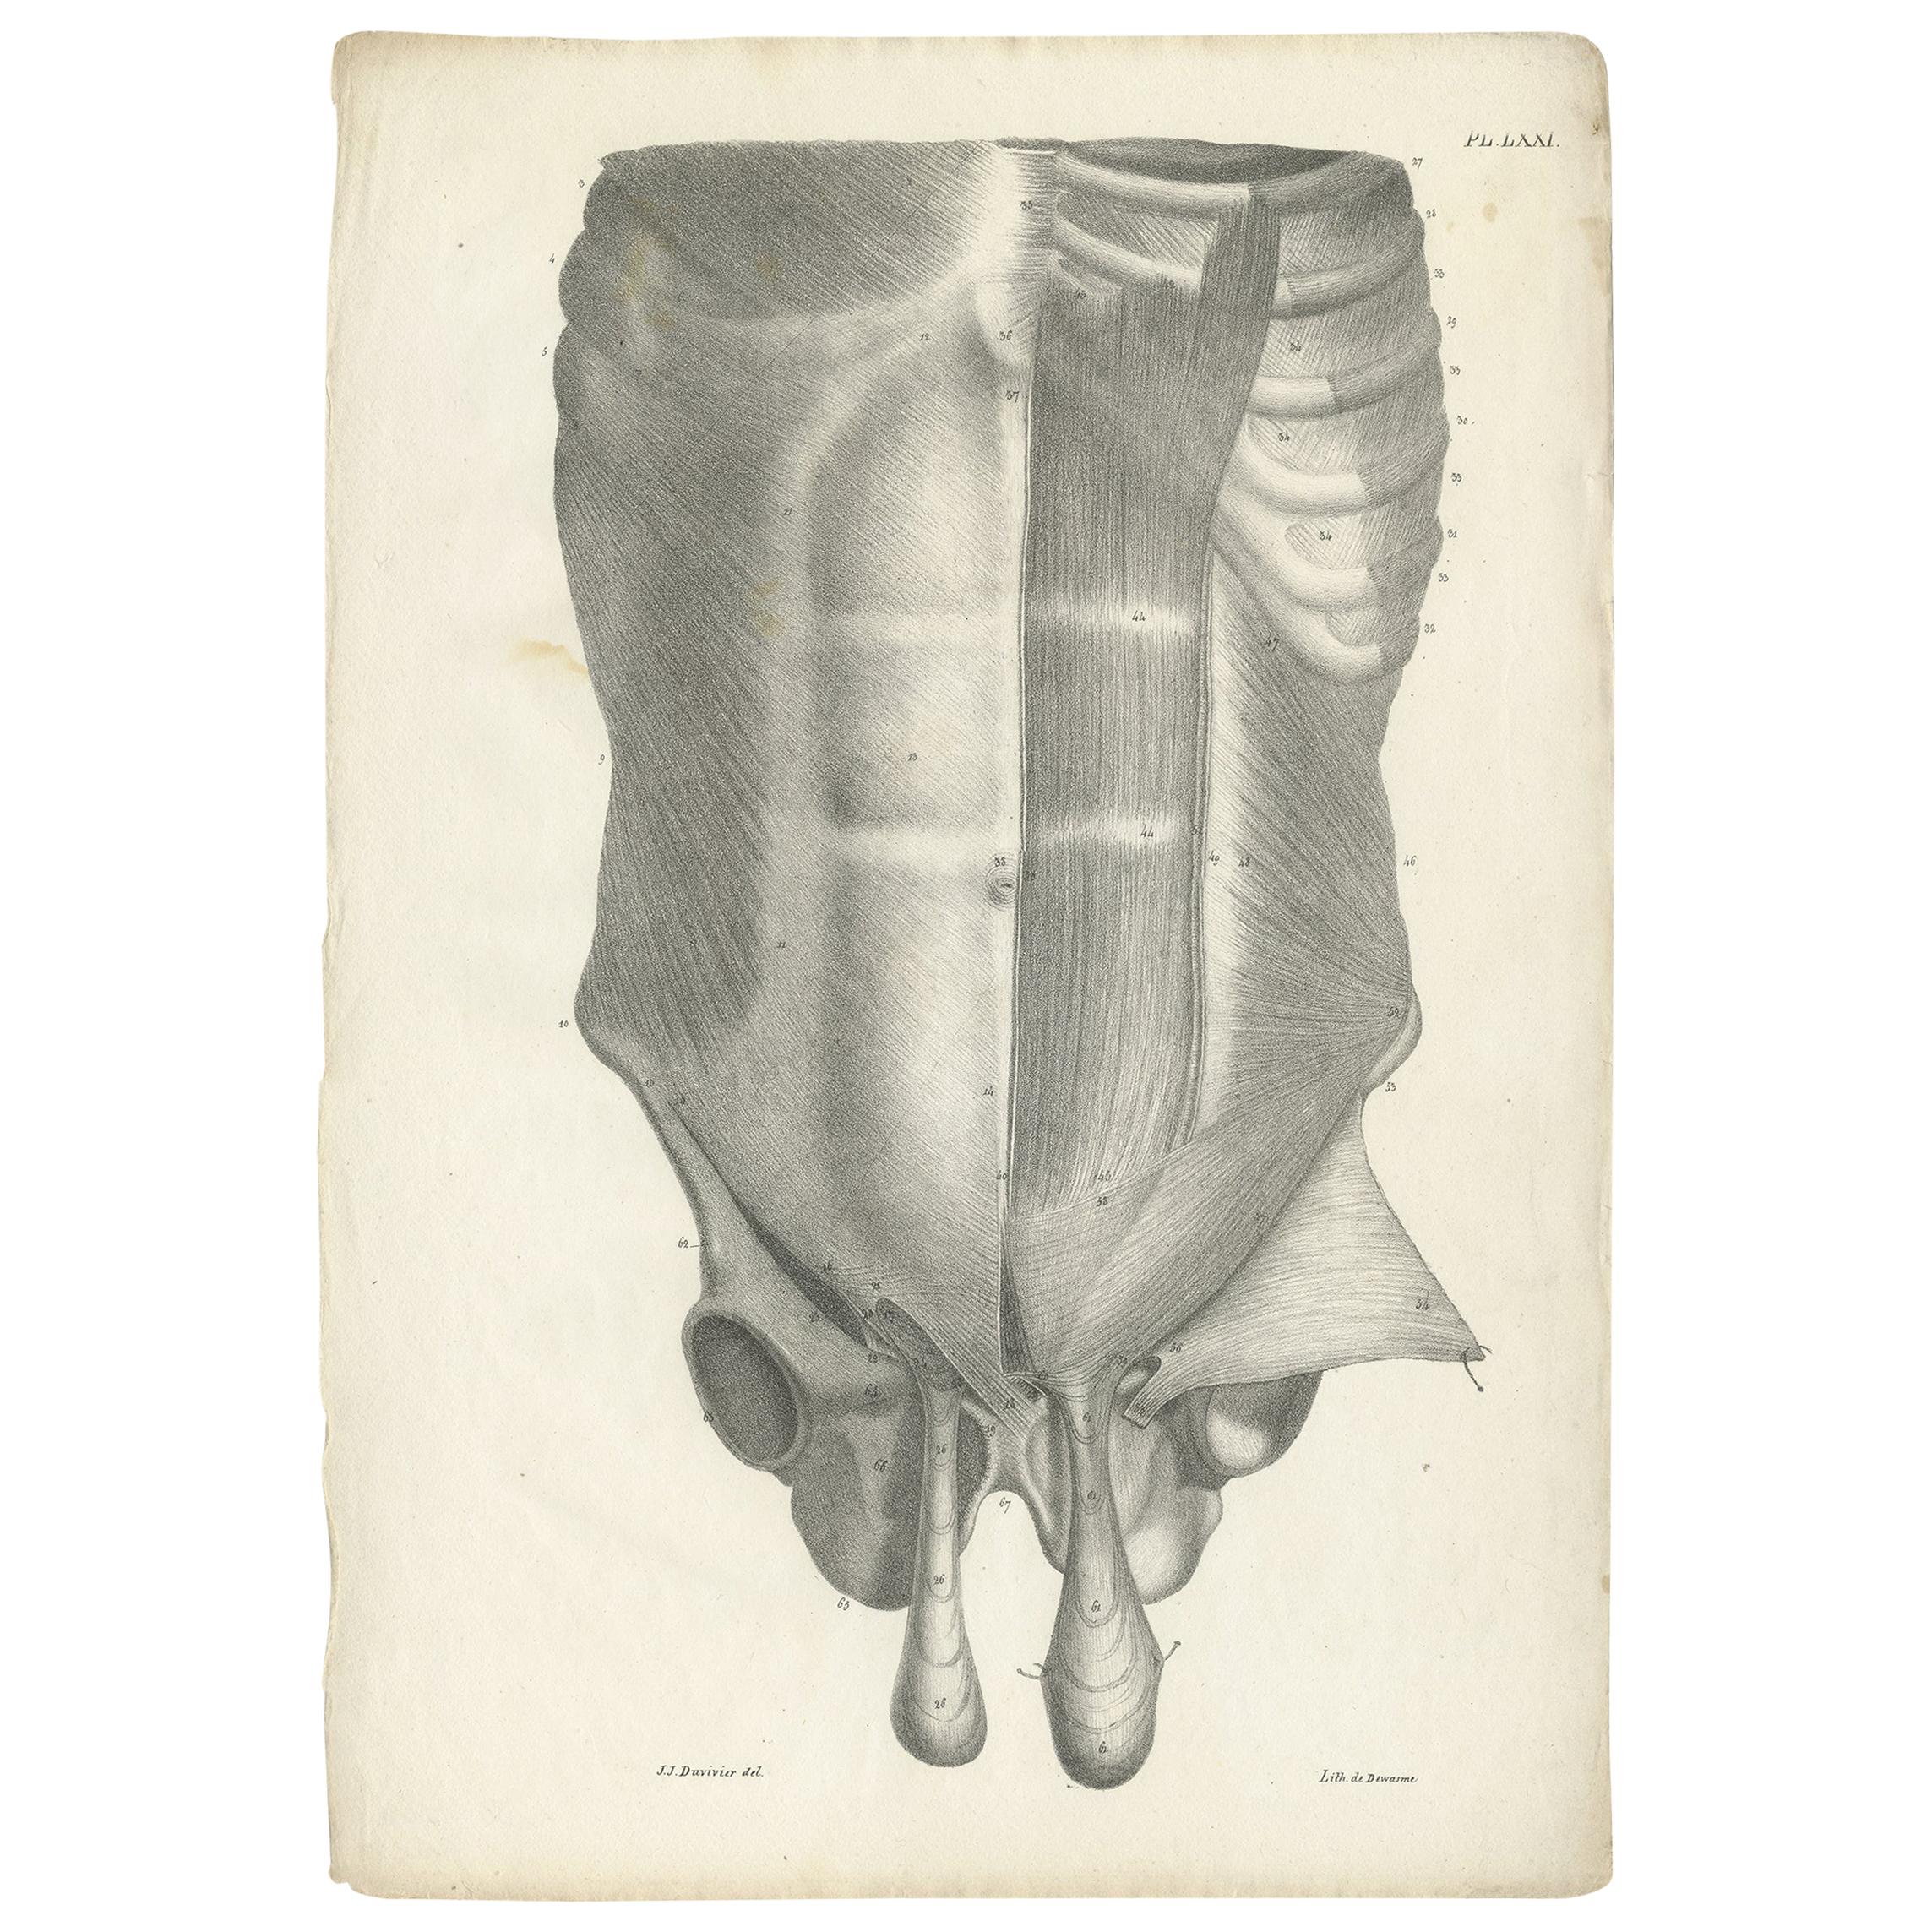 Pl. LXXI Antique Anatomy / Medical Print of the Male Torso by Cloquet, '1821' For Sale